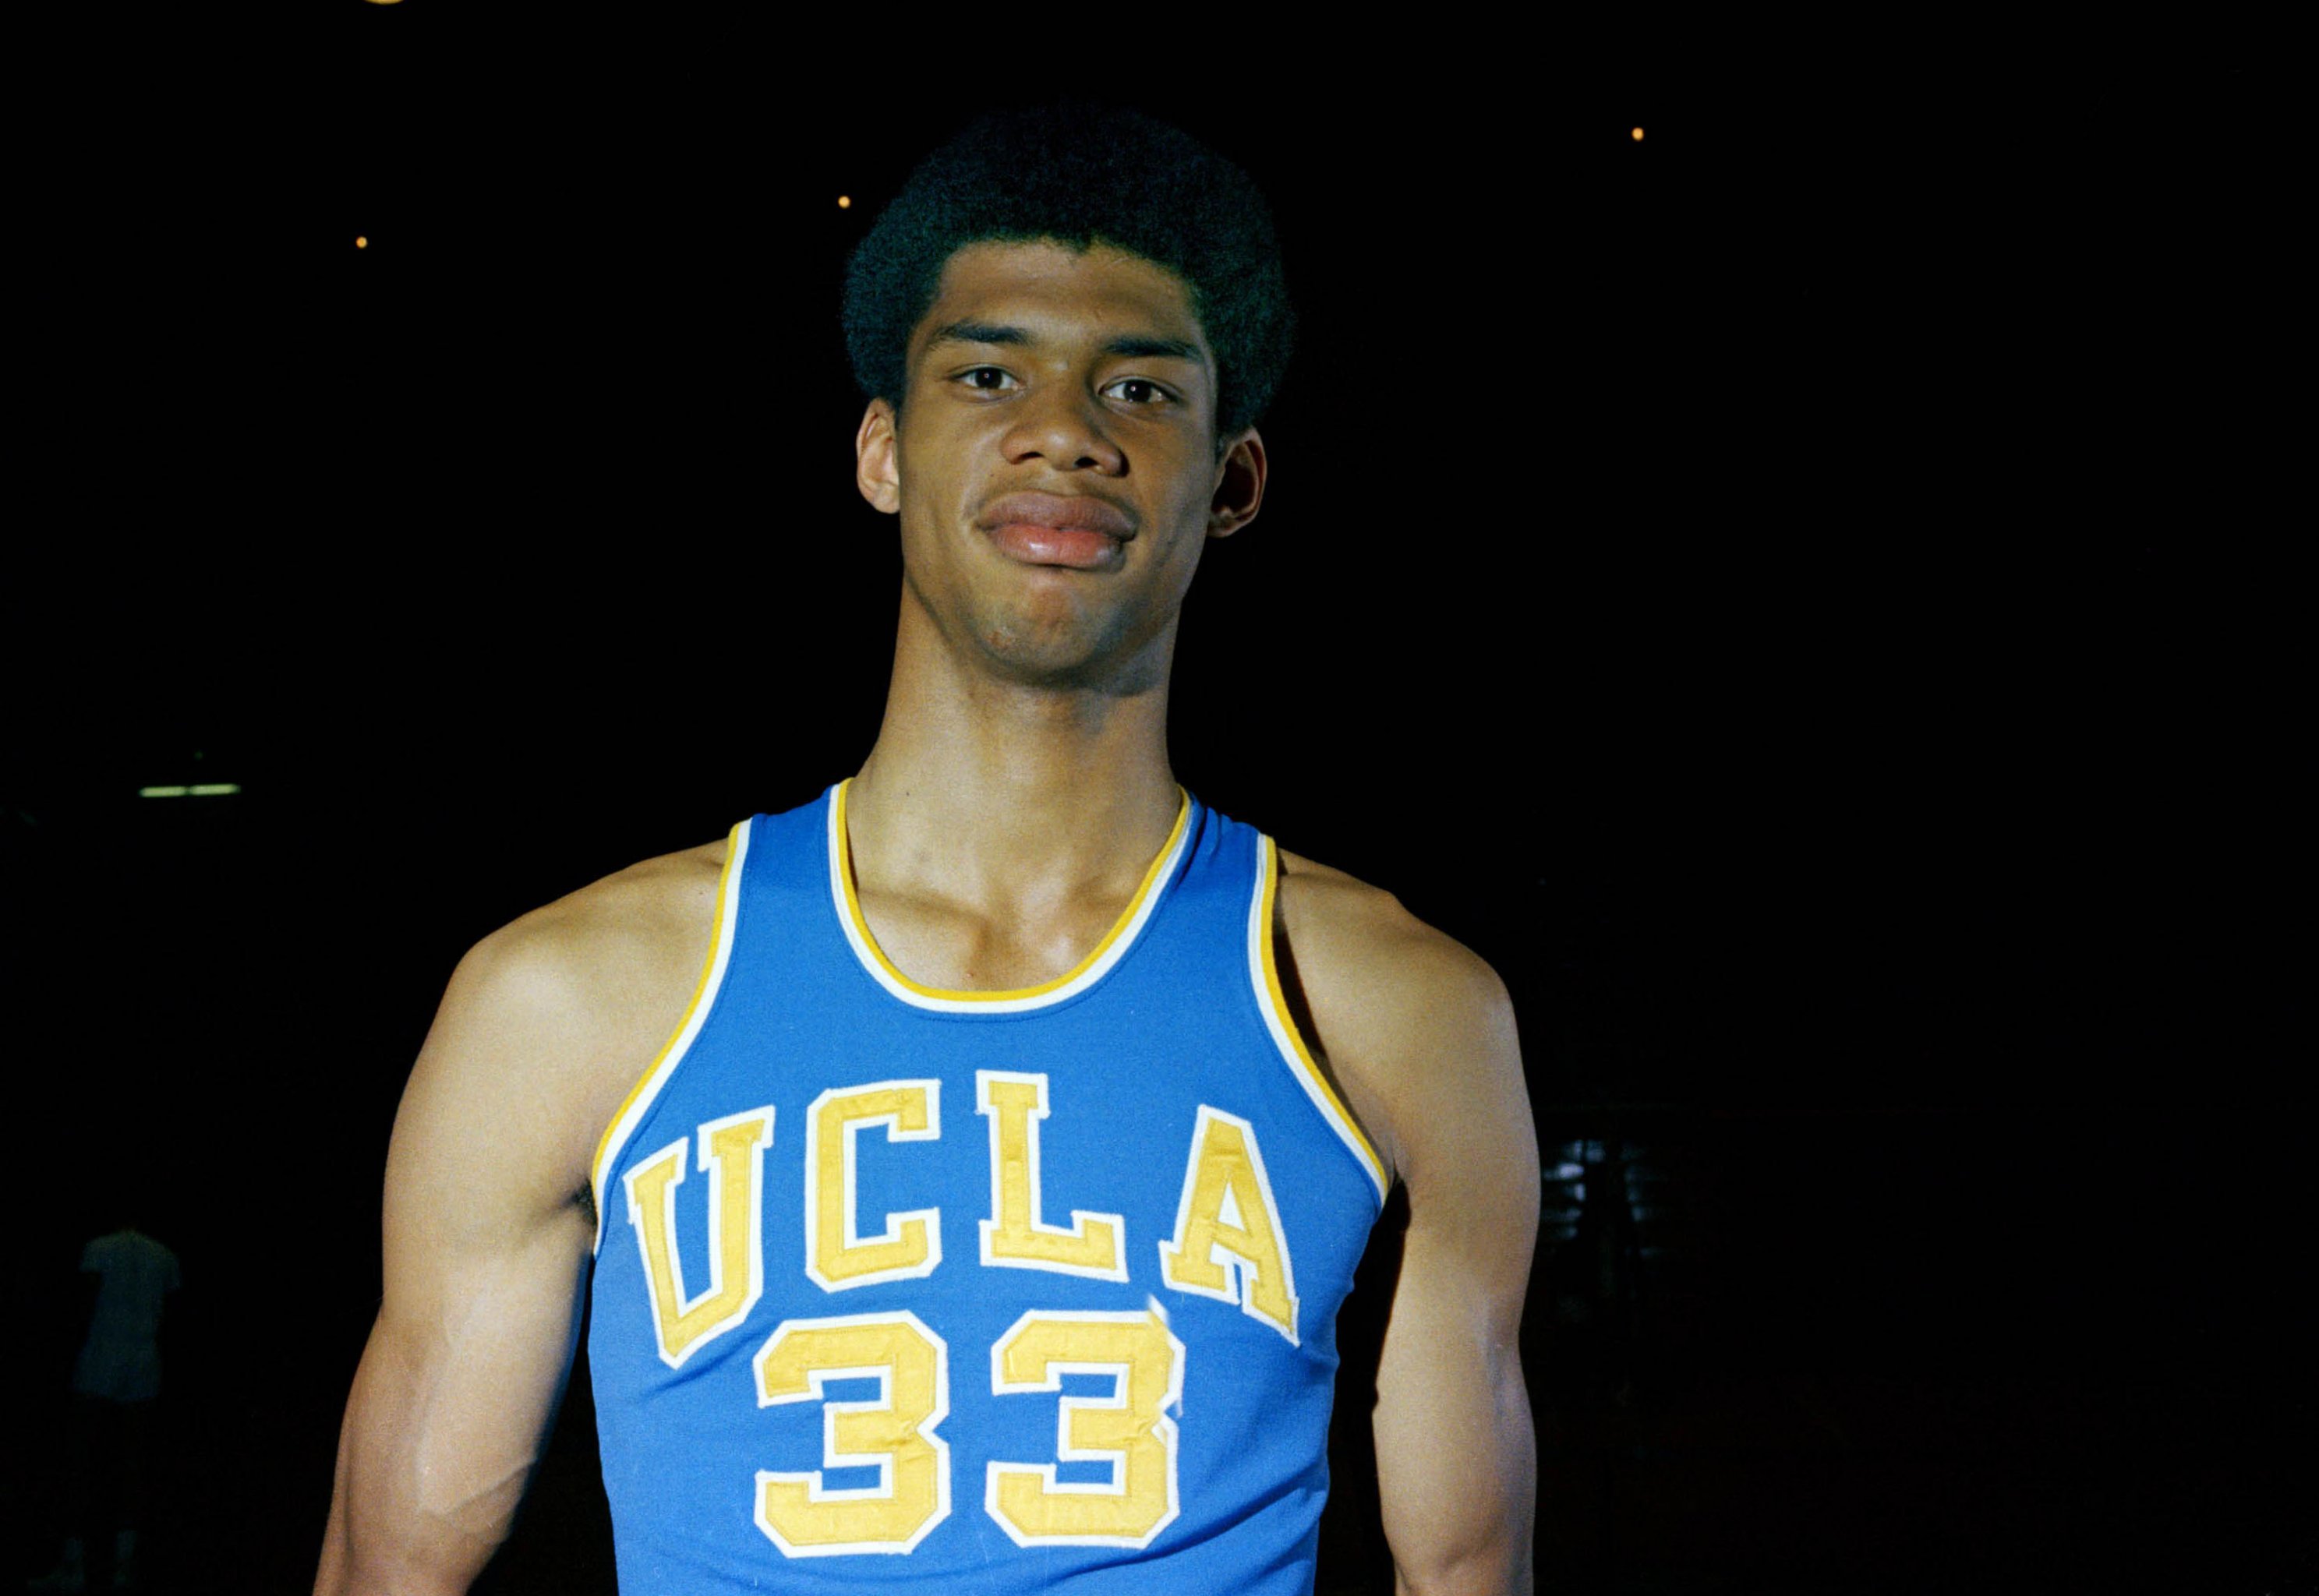 Ballislife.com on X: Kareem in college 88-2 record 56 PTS in his